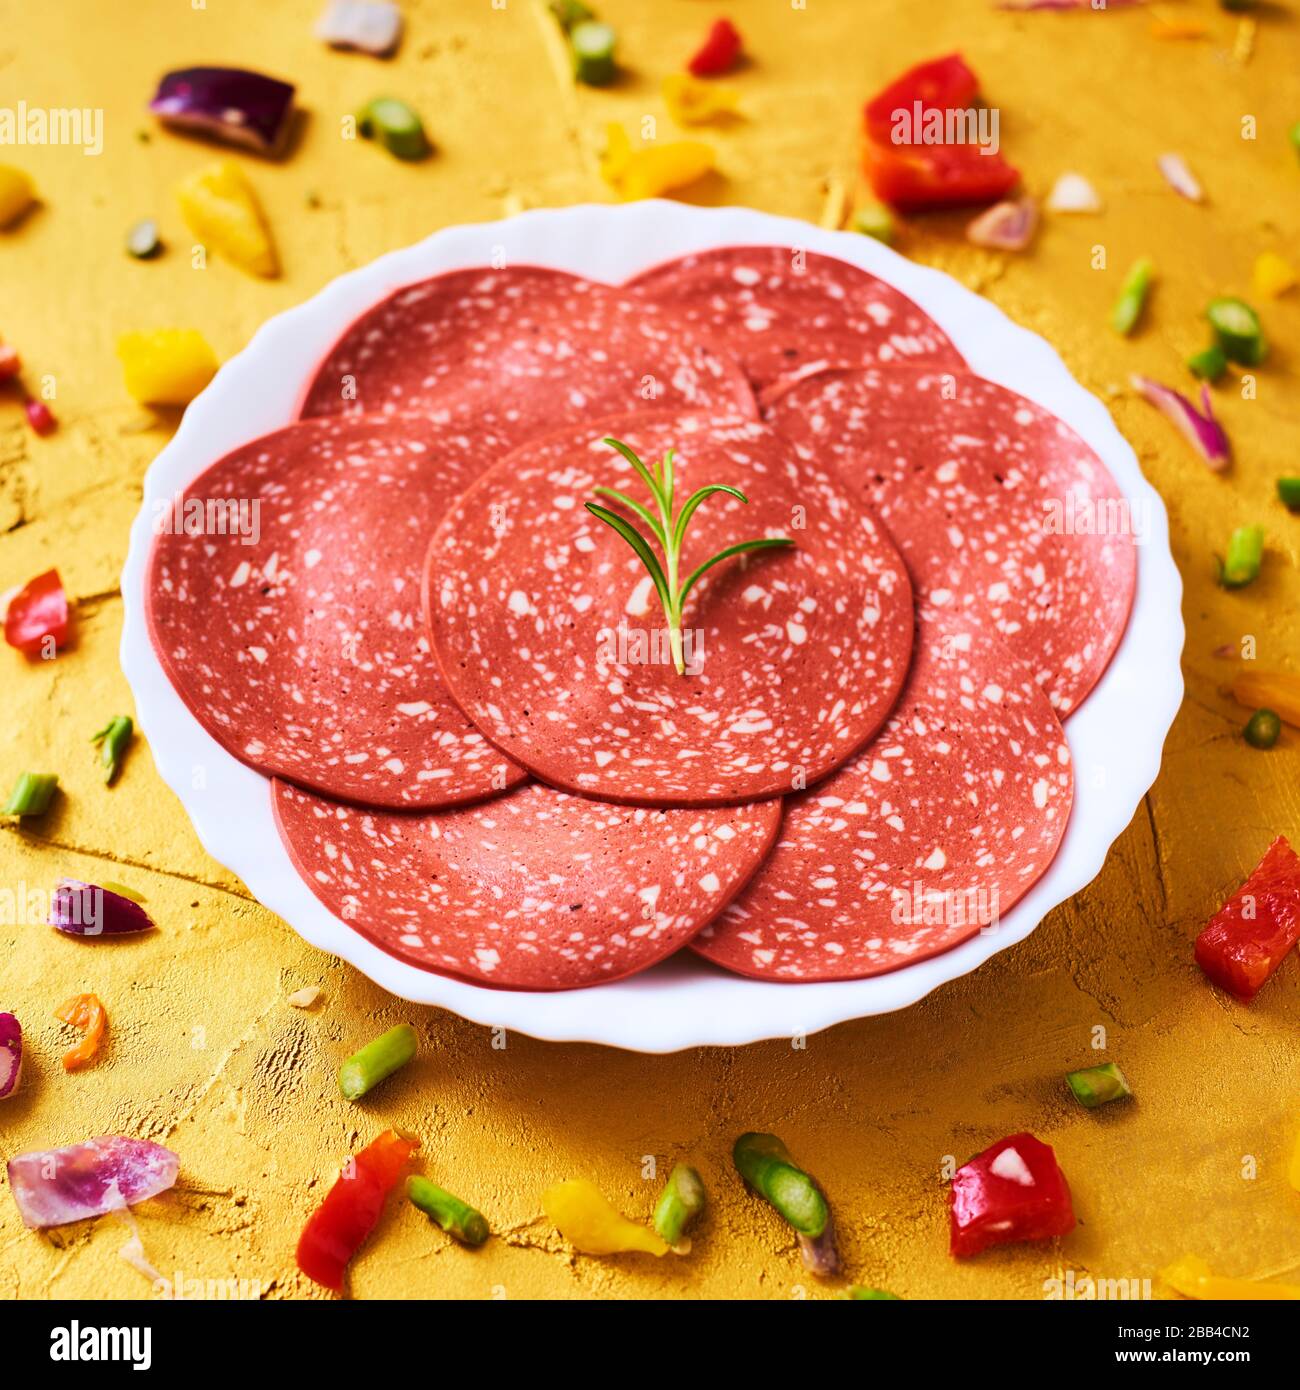 closeup of some slices of veggie salami in a plate, on a golden textured surface Stock Photo